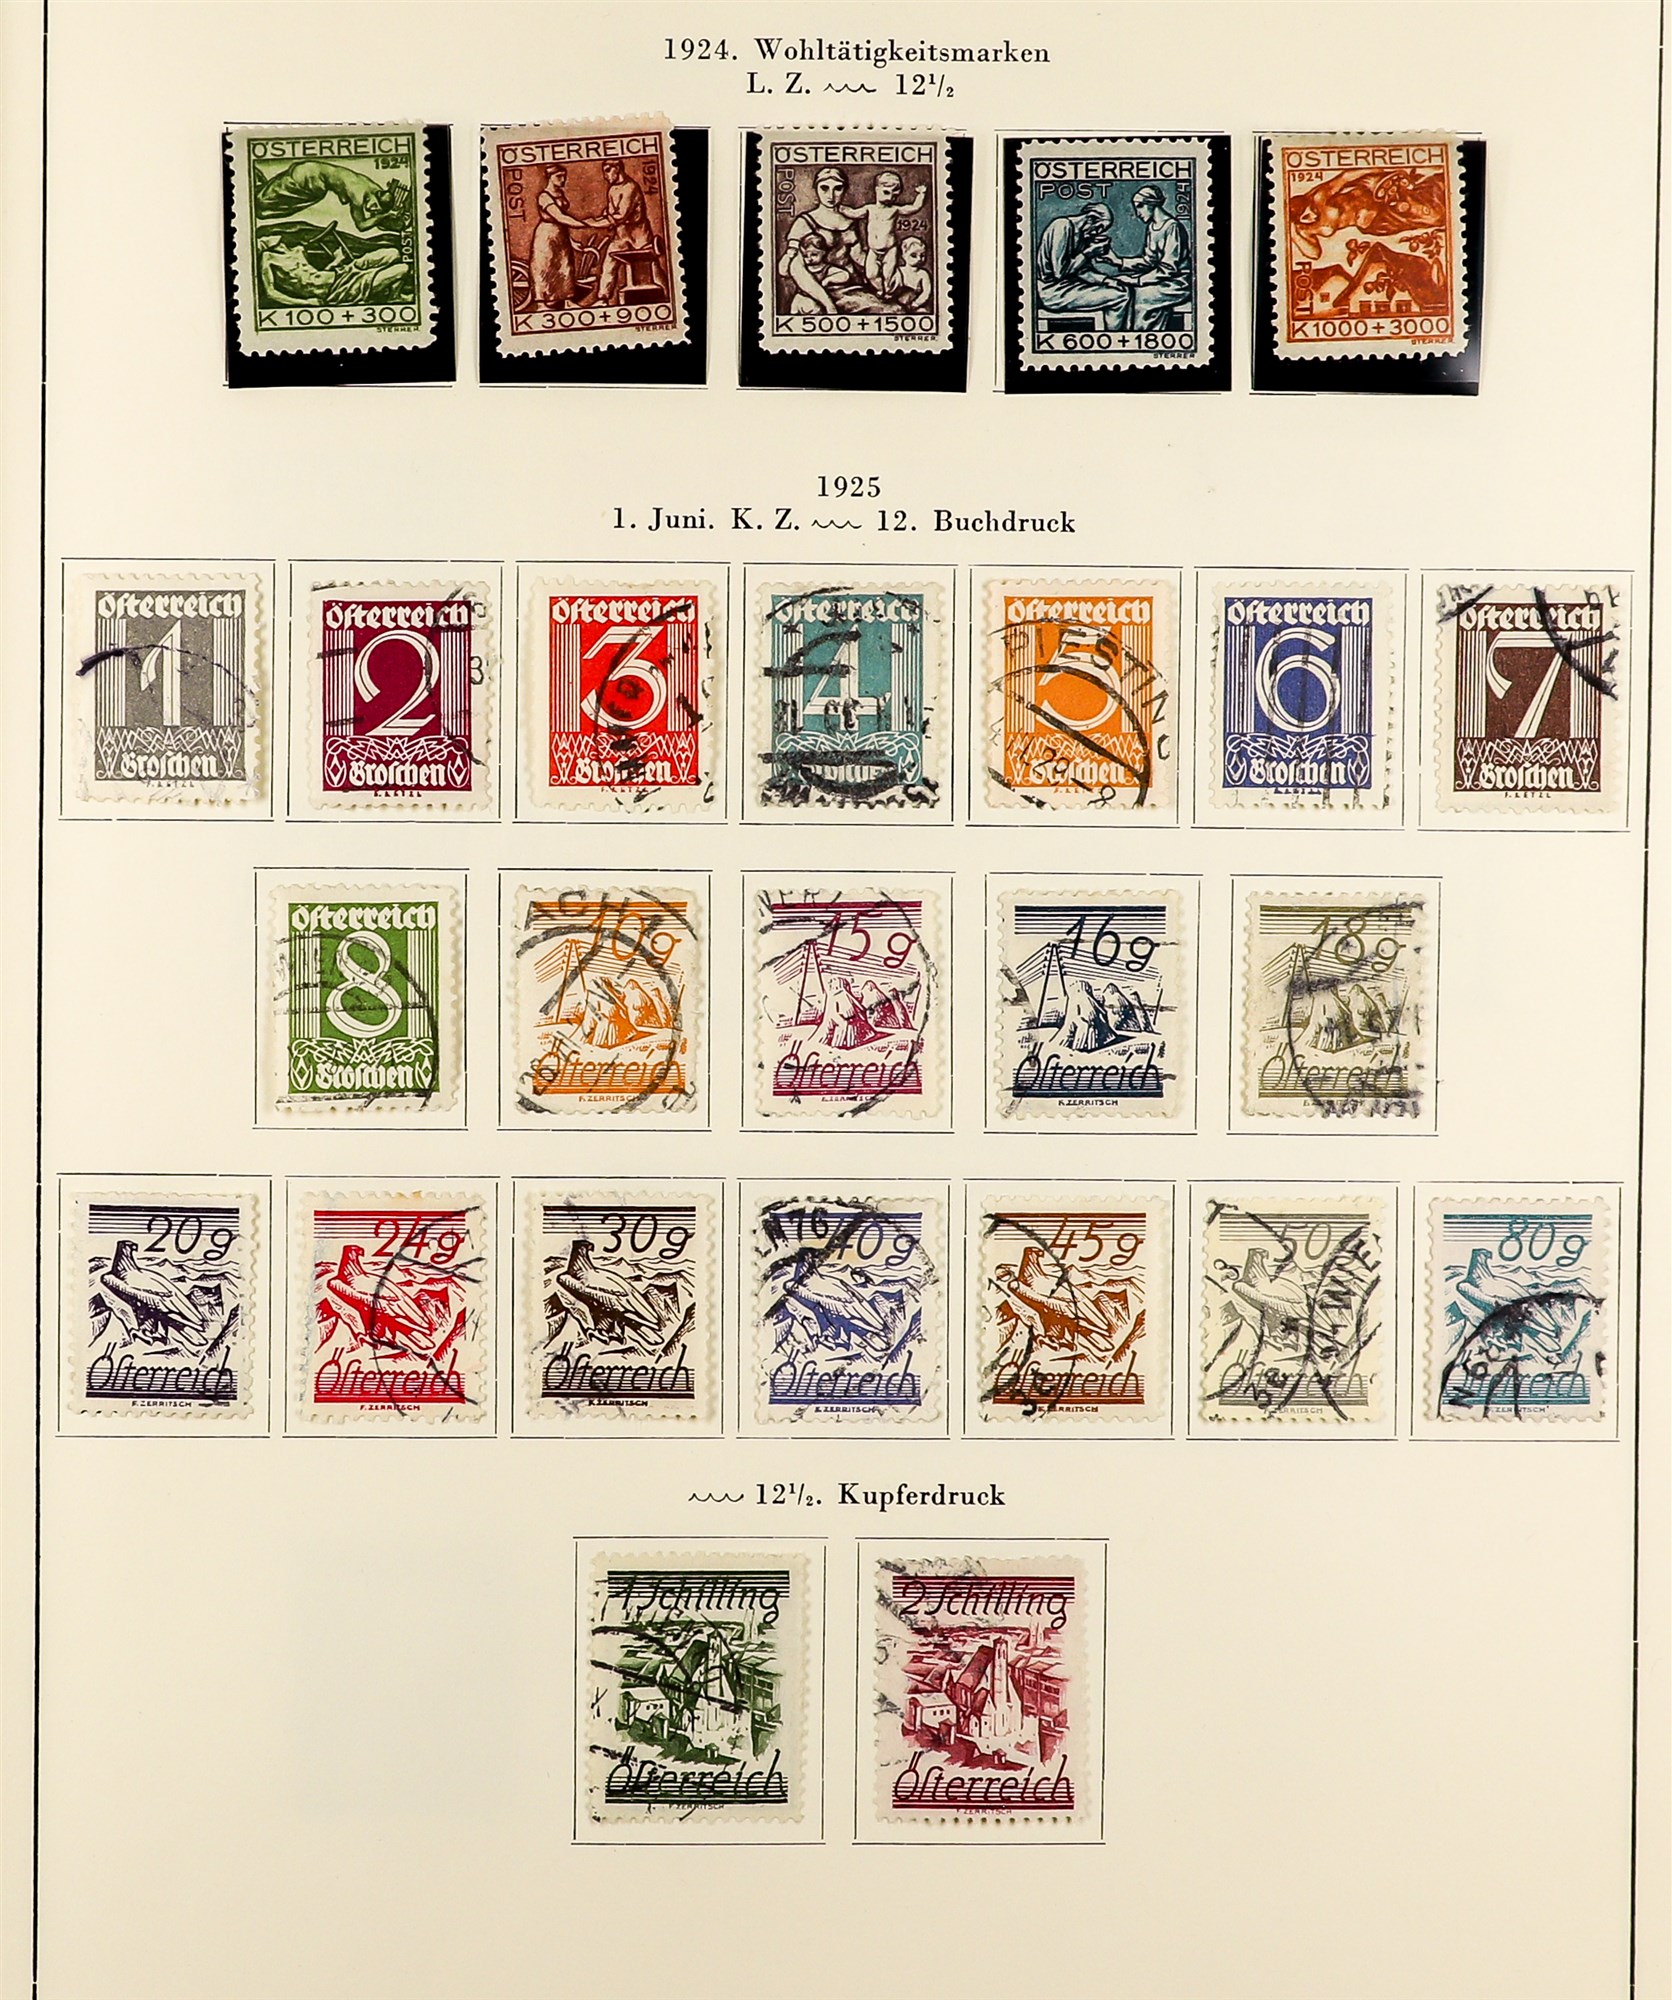 AUSTRIA 1918 - 1937 REPUBLIC COLLECTION of chiefly mint / never hinged mint sets in album incl - Image 16 of 22